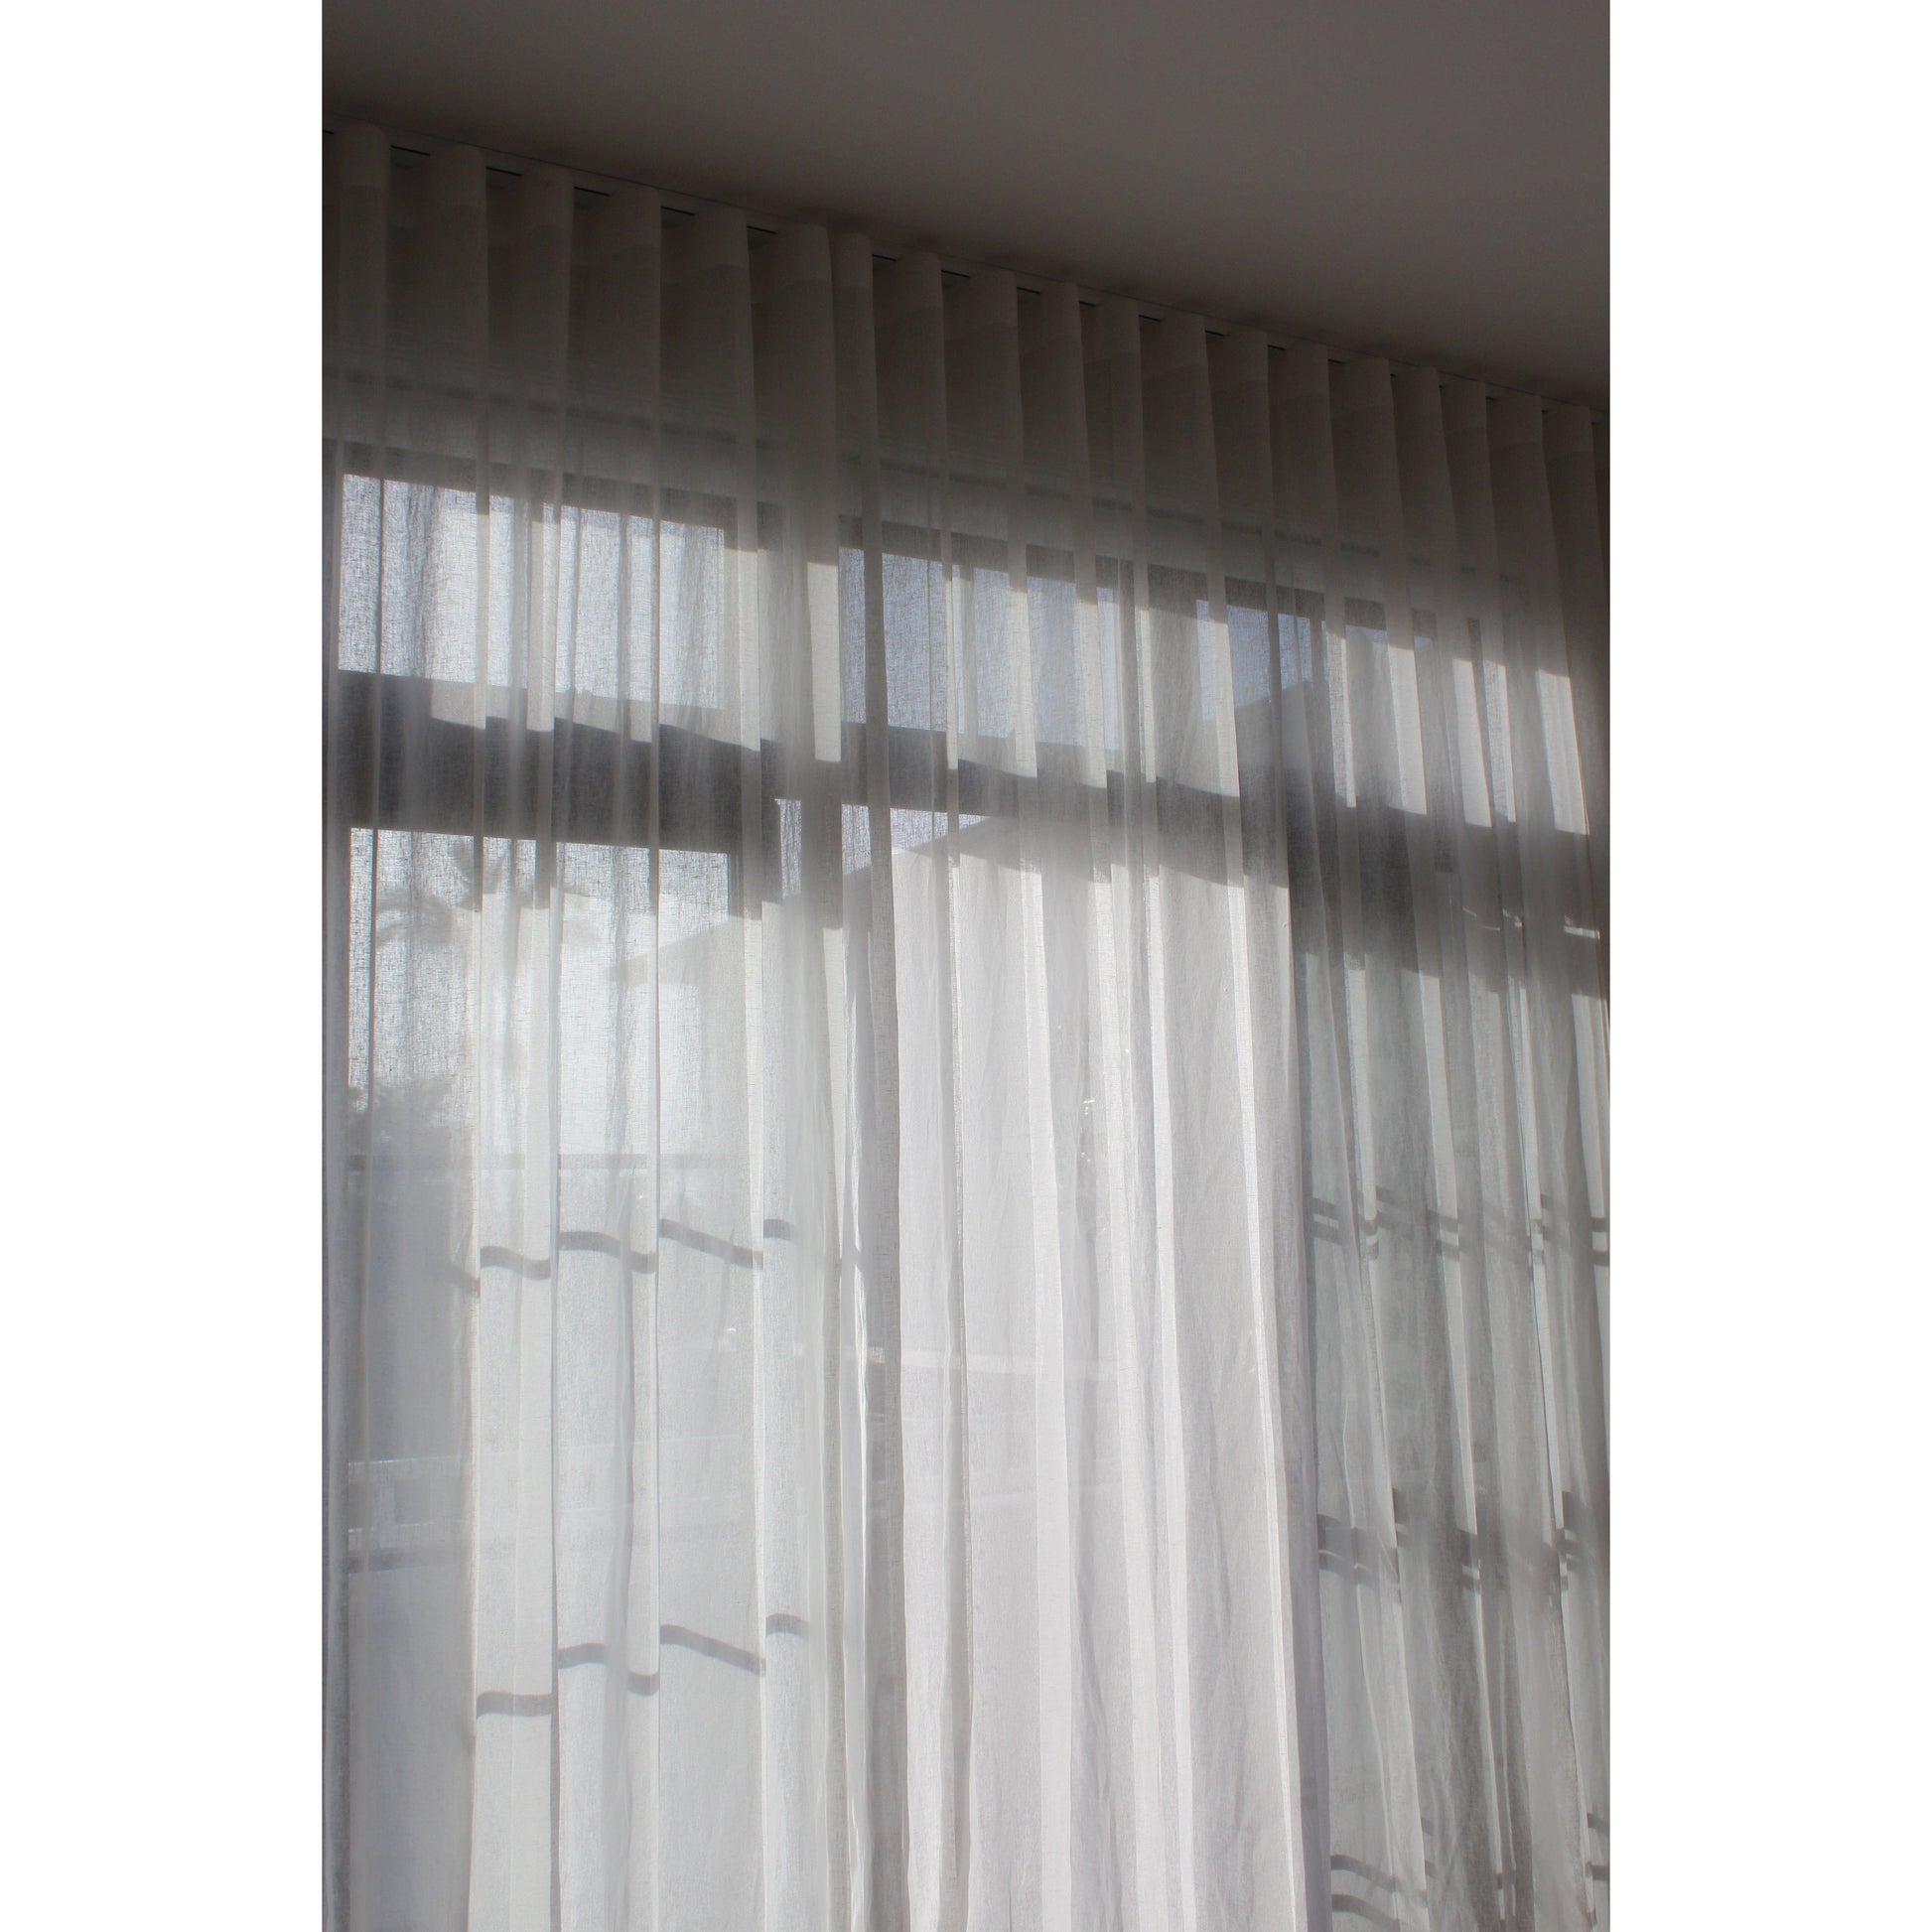  - S-wave Curtain By Material World || Material World